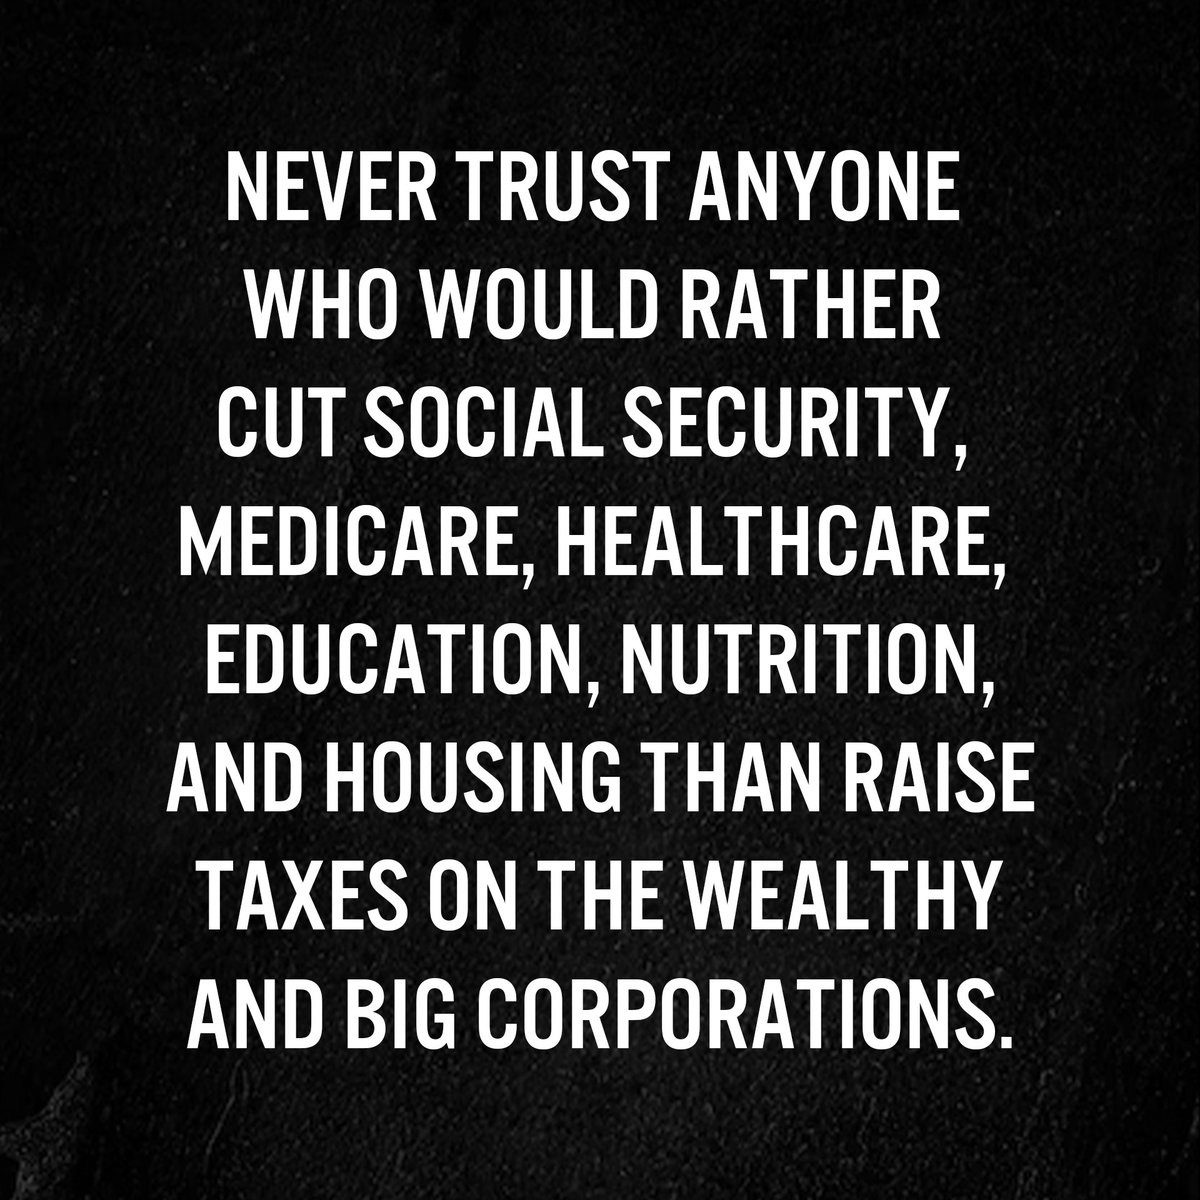 Republicans want us to believe we 'can't afford' Social Security, Medicare, housing, education, paid leave, or lower drug prices. But we can afford all that and more if we just make the billionaires and corporations pay their fair share in taxes. Tax the rich. #StopTrumpsTaxScam